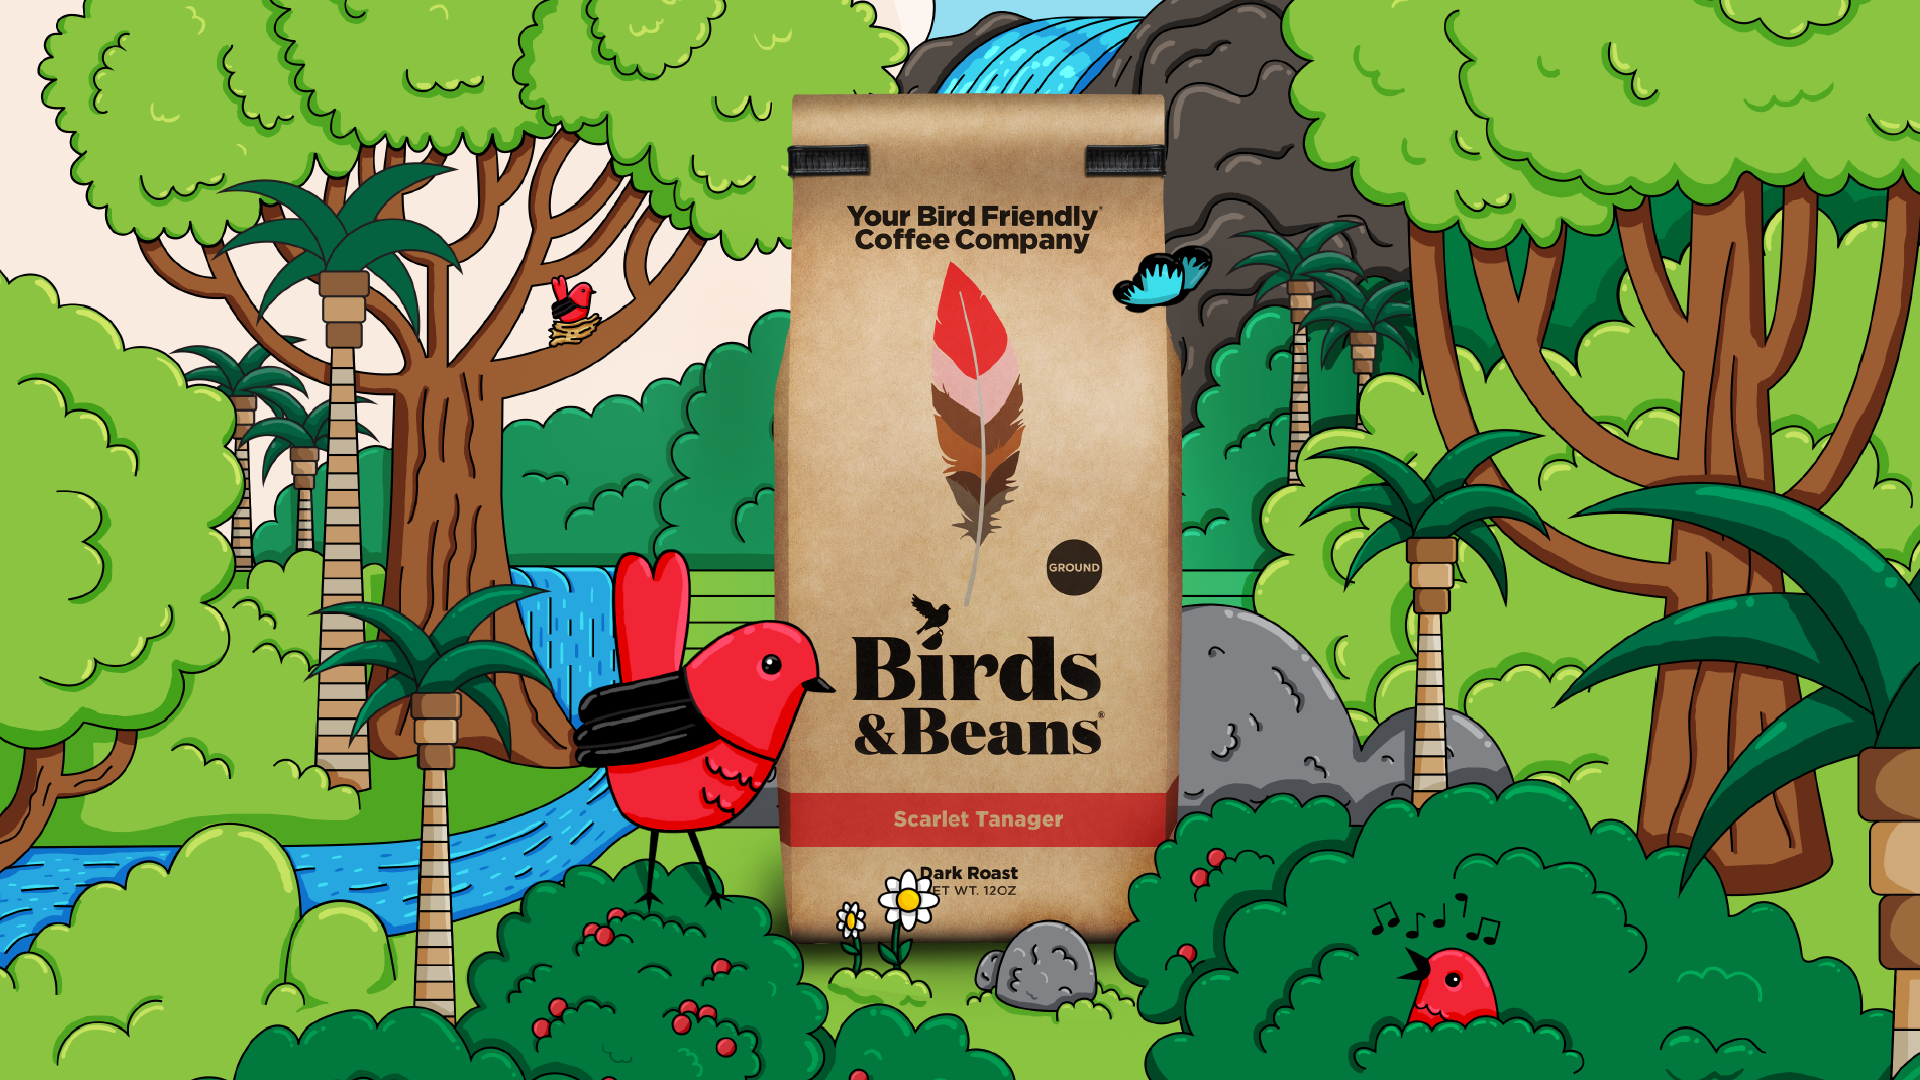 A Scarlet Tanager perches in a tree next to a Birds & Beans bag of the same name. A second bird sings in a bush, and a third sits atop a next among the trees. There are a variety of trees and plants as well as a waterfall. The entire image is hand illustrated with the exception of the bag.